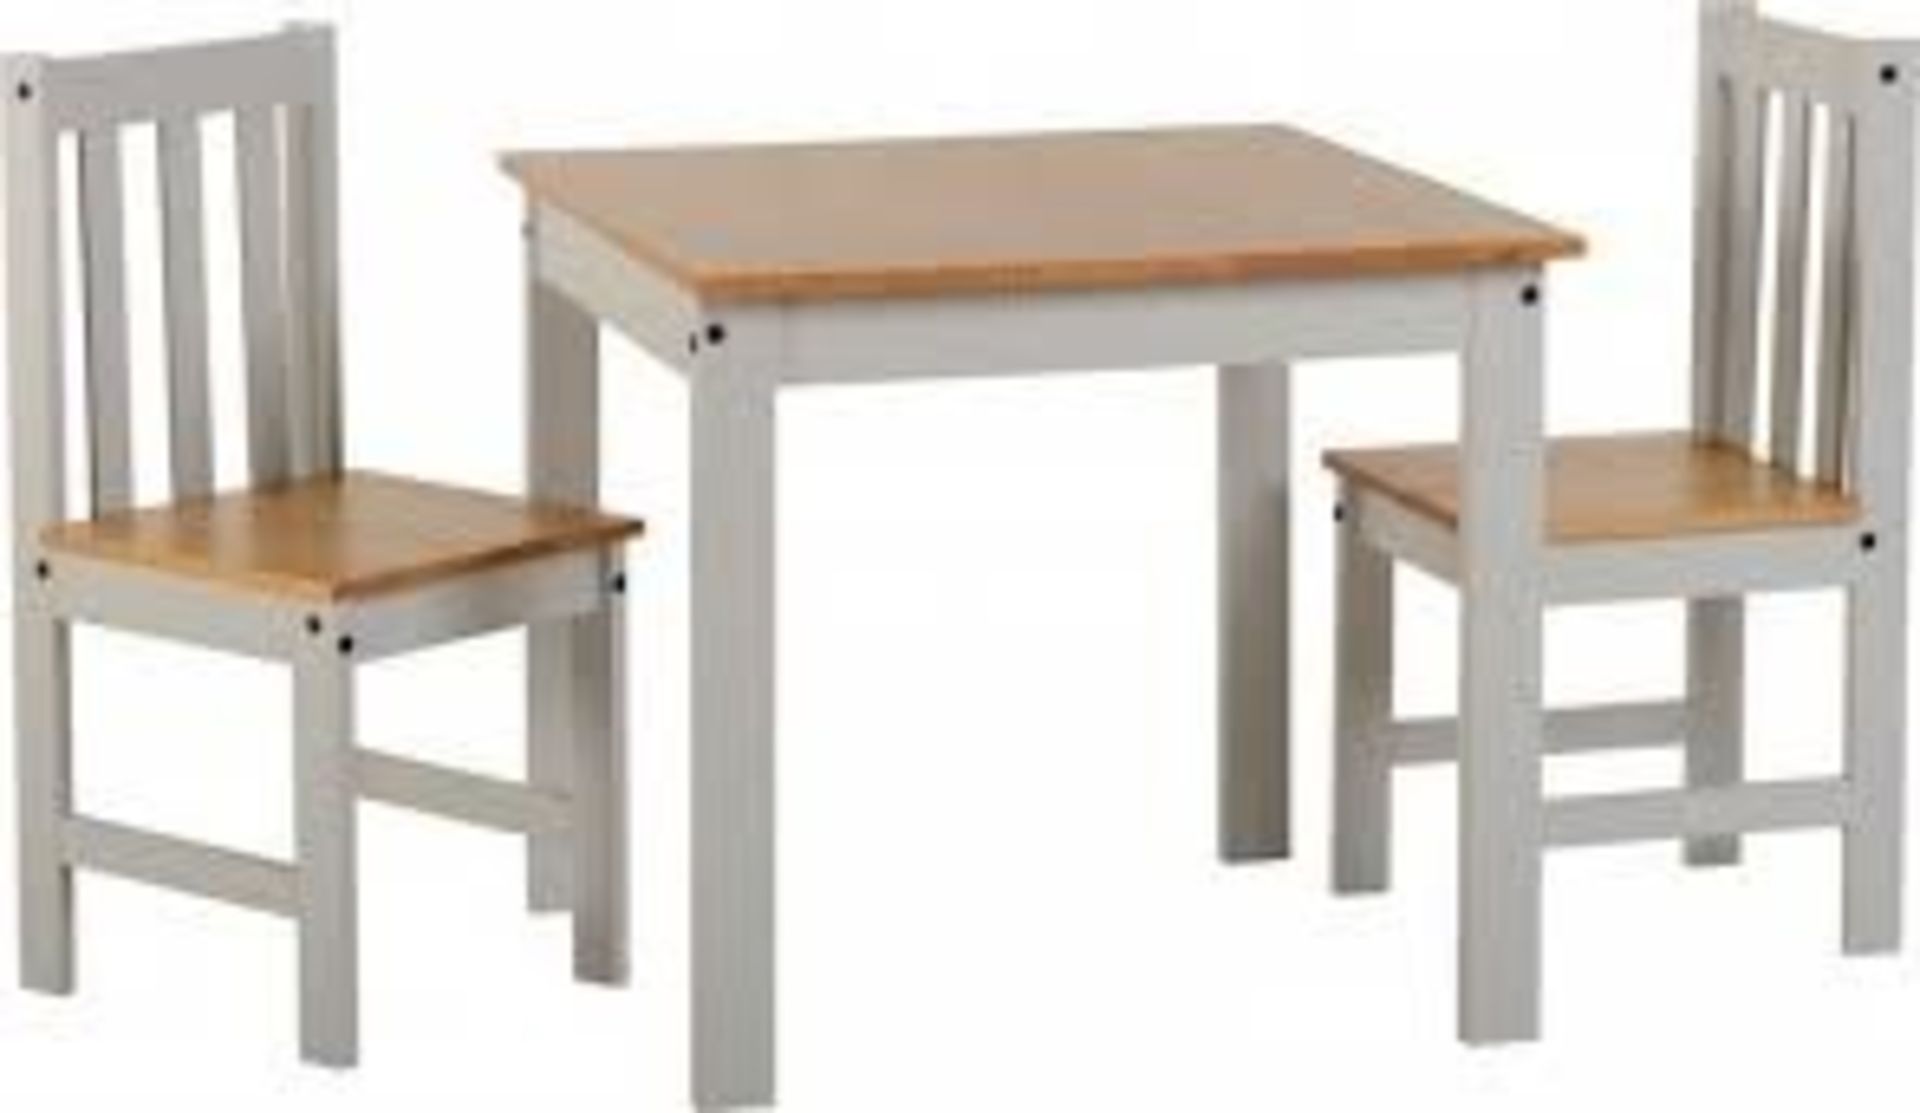 Boxed Ludlow 1 + 2 Seater Childrens Dining Set RRP £100 (Pictures are for illustration purposes